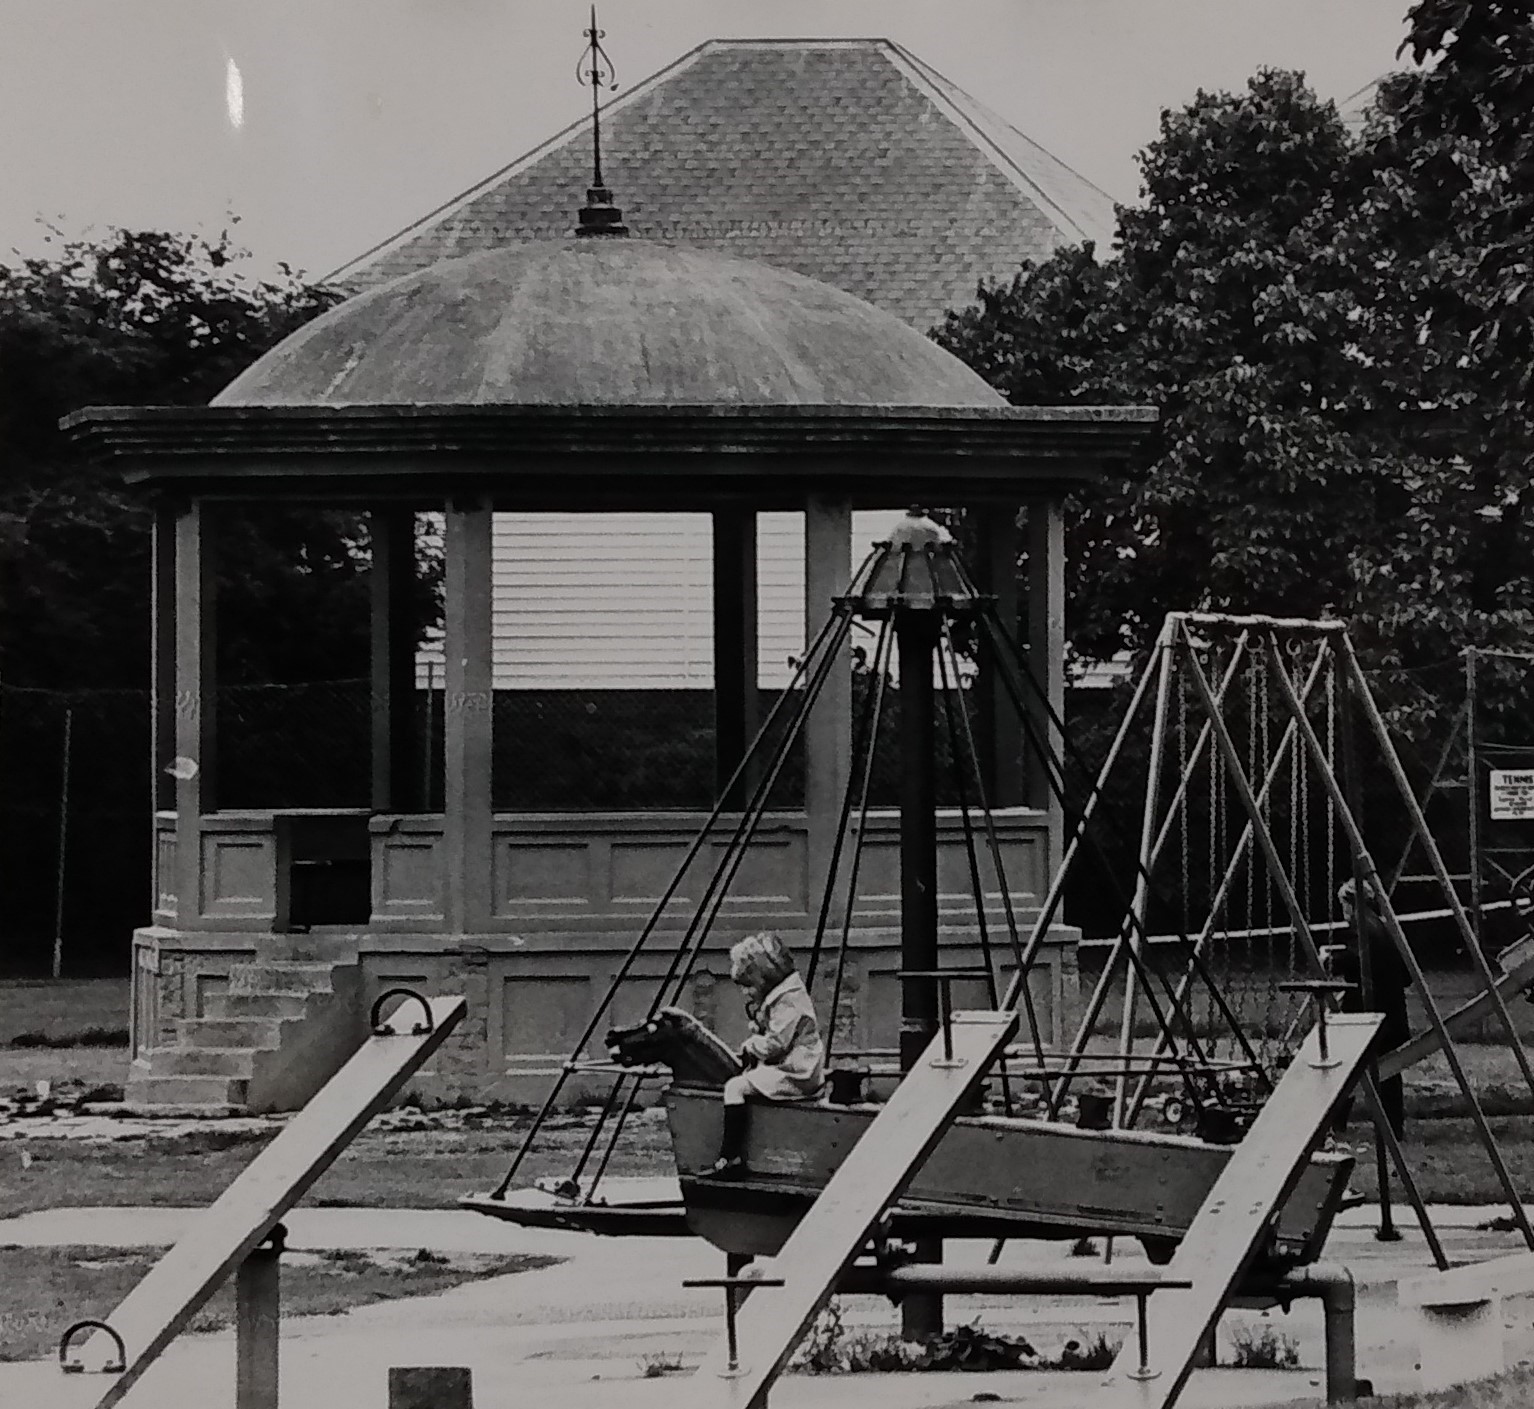 Evesham’s bandstand as it looked in March 1977, with one rather forlorn-looking soul on the horse